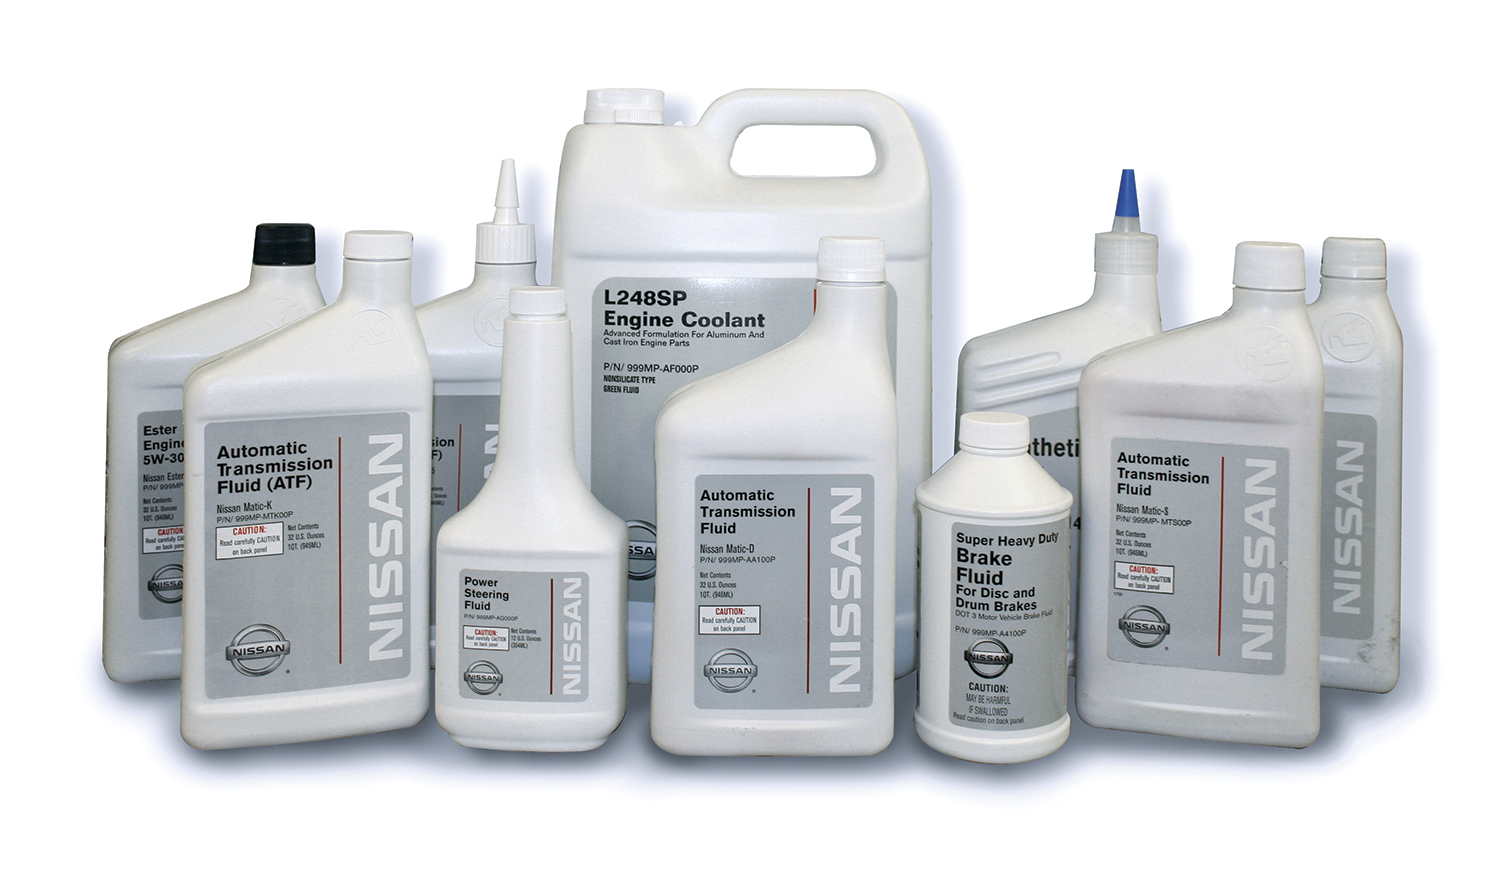 Versa Lube Silicone Grease - Well Worth Professional Car Care Products